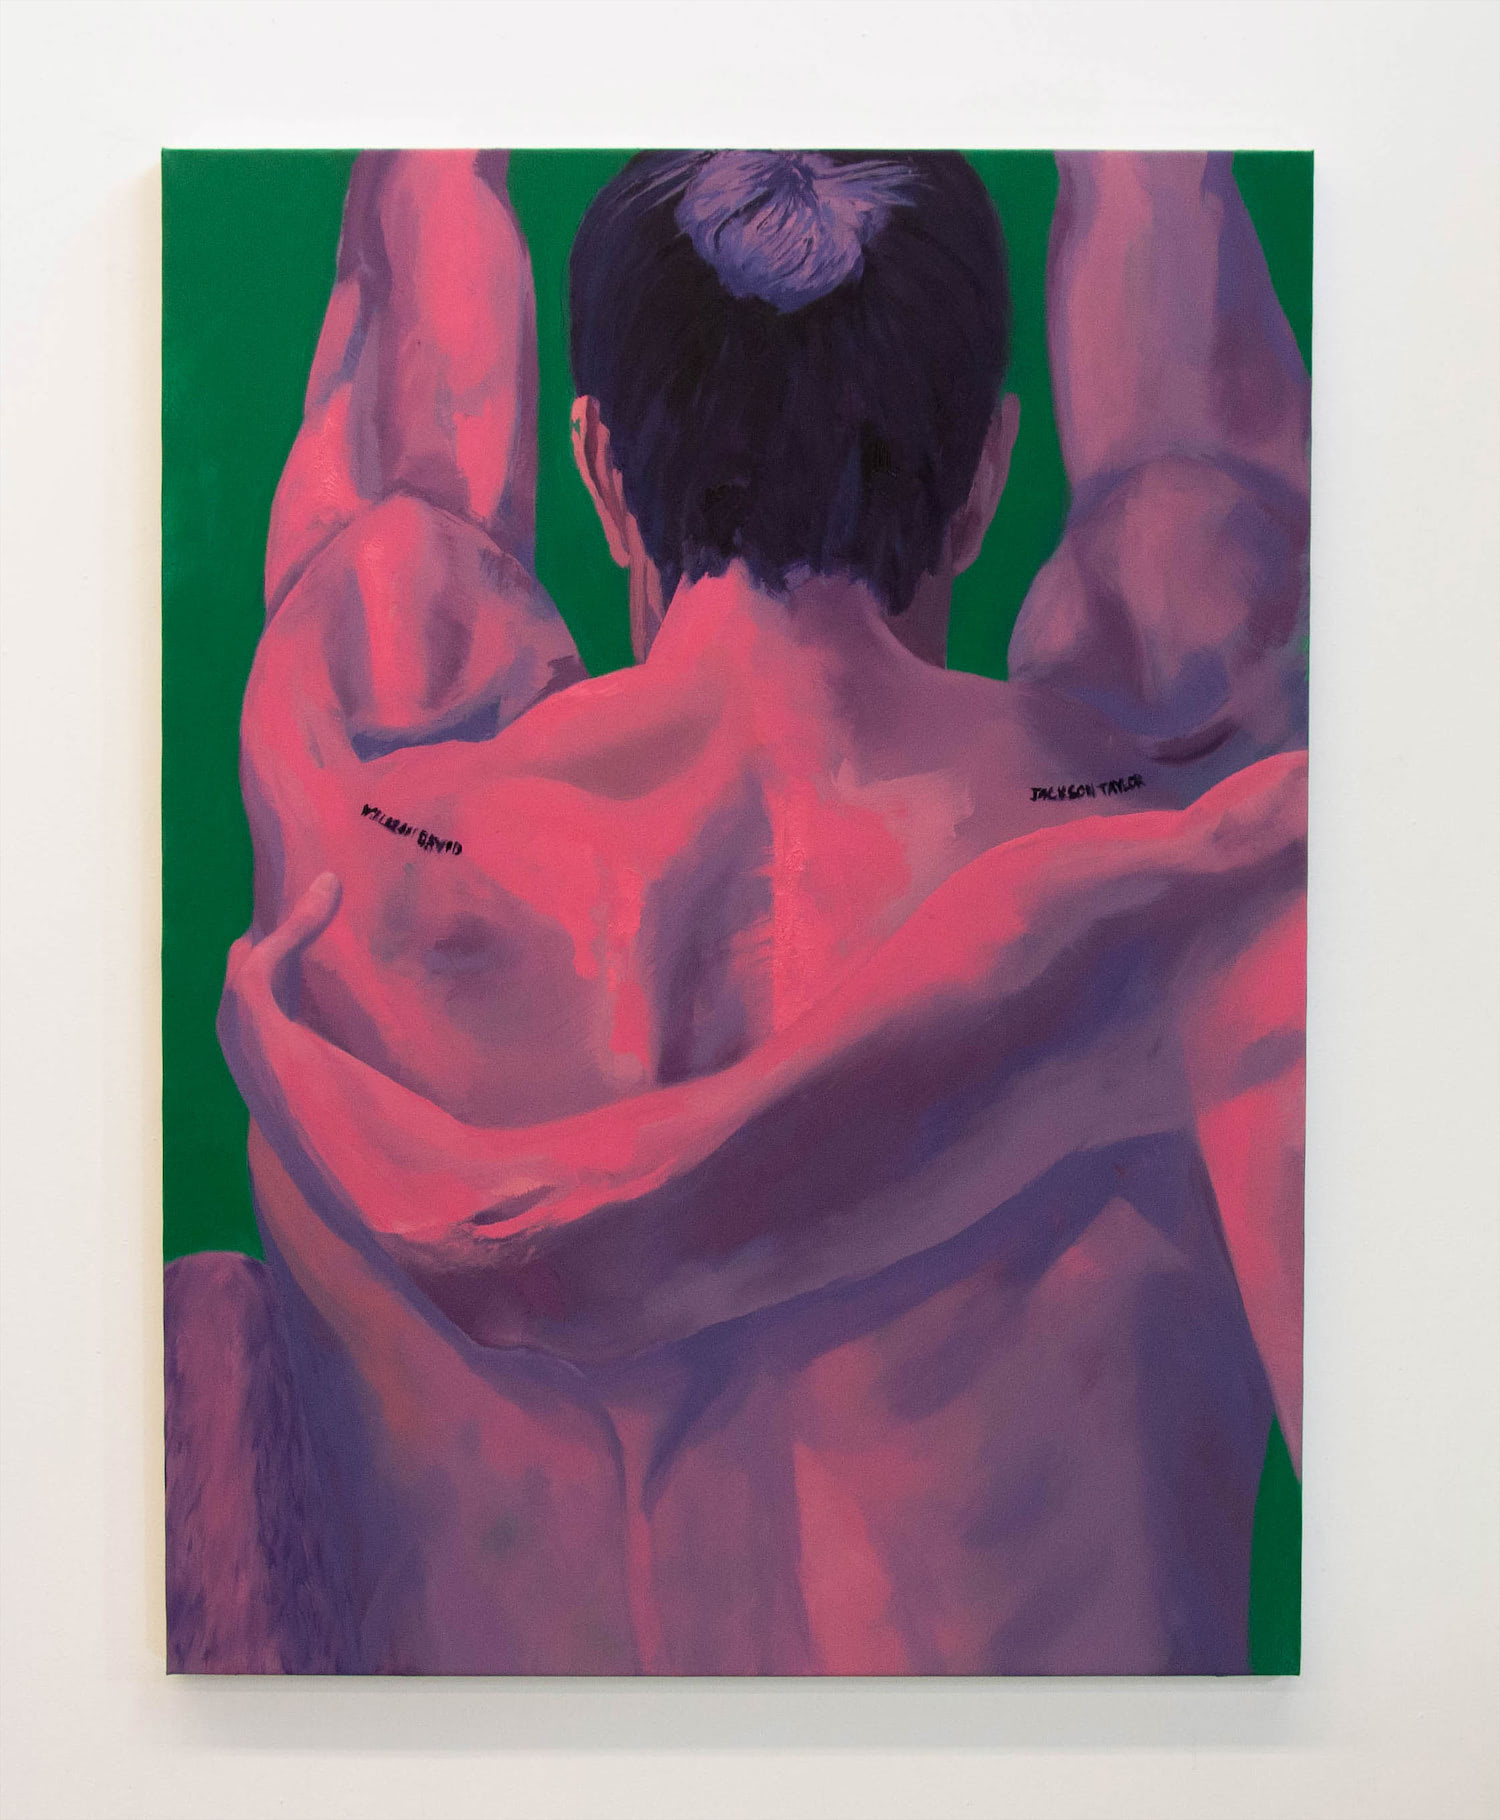 This image displays a body composed of pinks and purples in a vast green space. The oil painting depicts a close up of a man with his arms stretched overhead. The majority of the canvas is filled by the man's back with a leg in the bottom left corner emerging. A mysterious third arm reaches across the man's back and hooks around, almost as if to hug the man with outstretched arms.